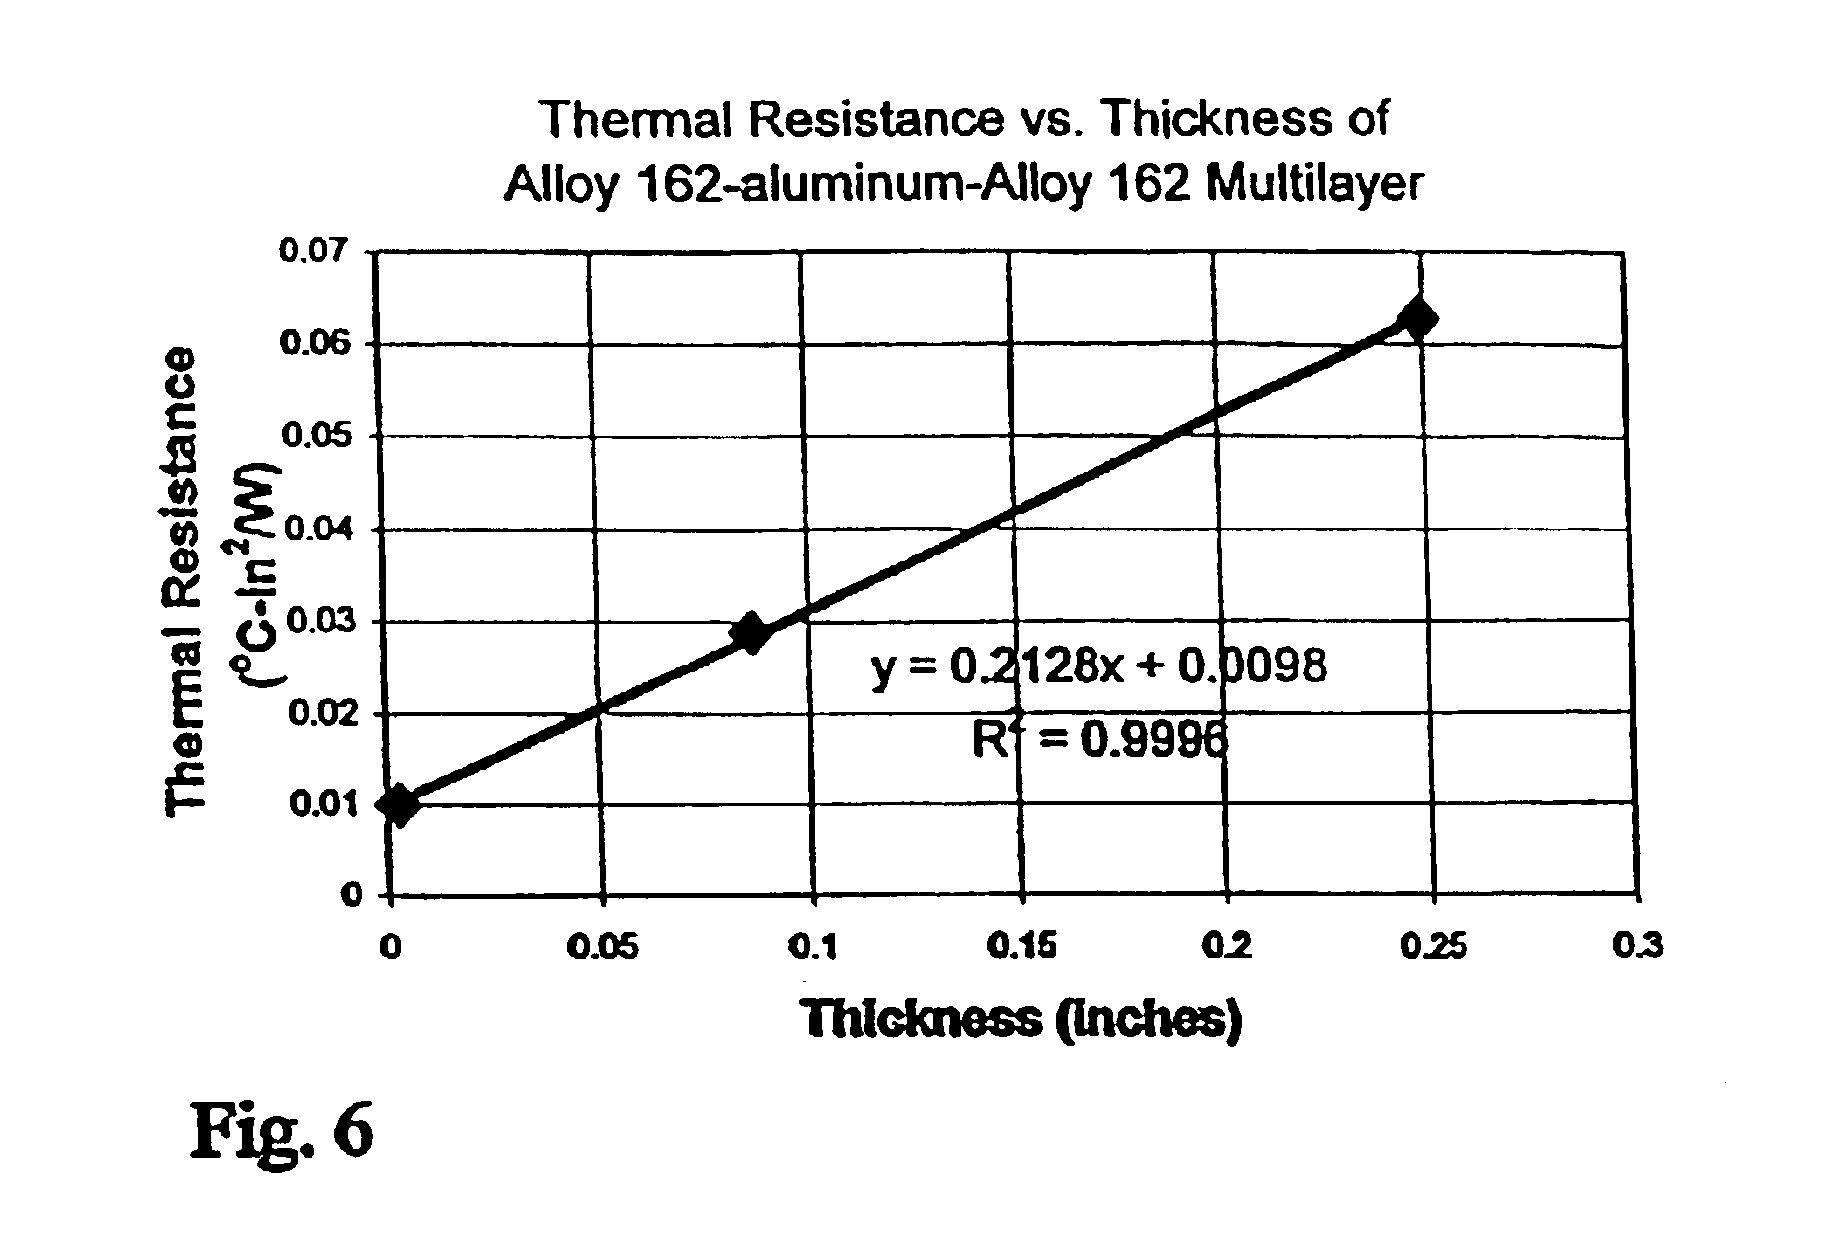 Thermal interface structure for placement between a microelectronic component package and heat sink